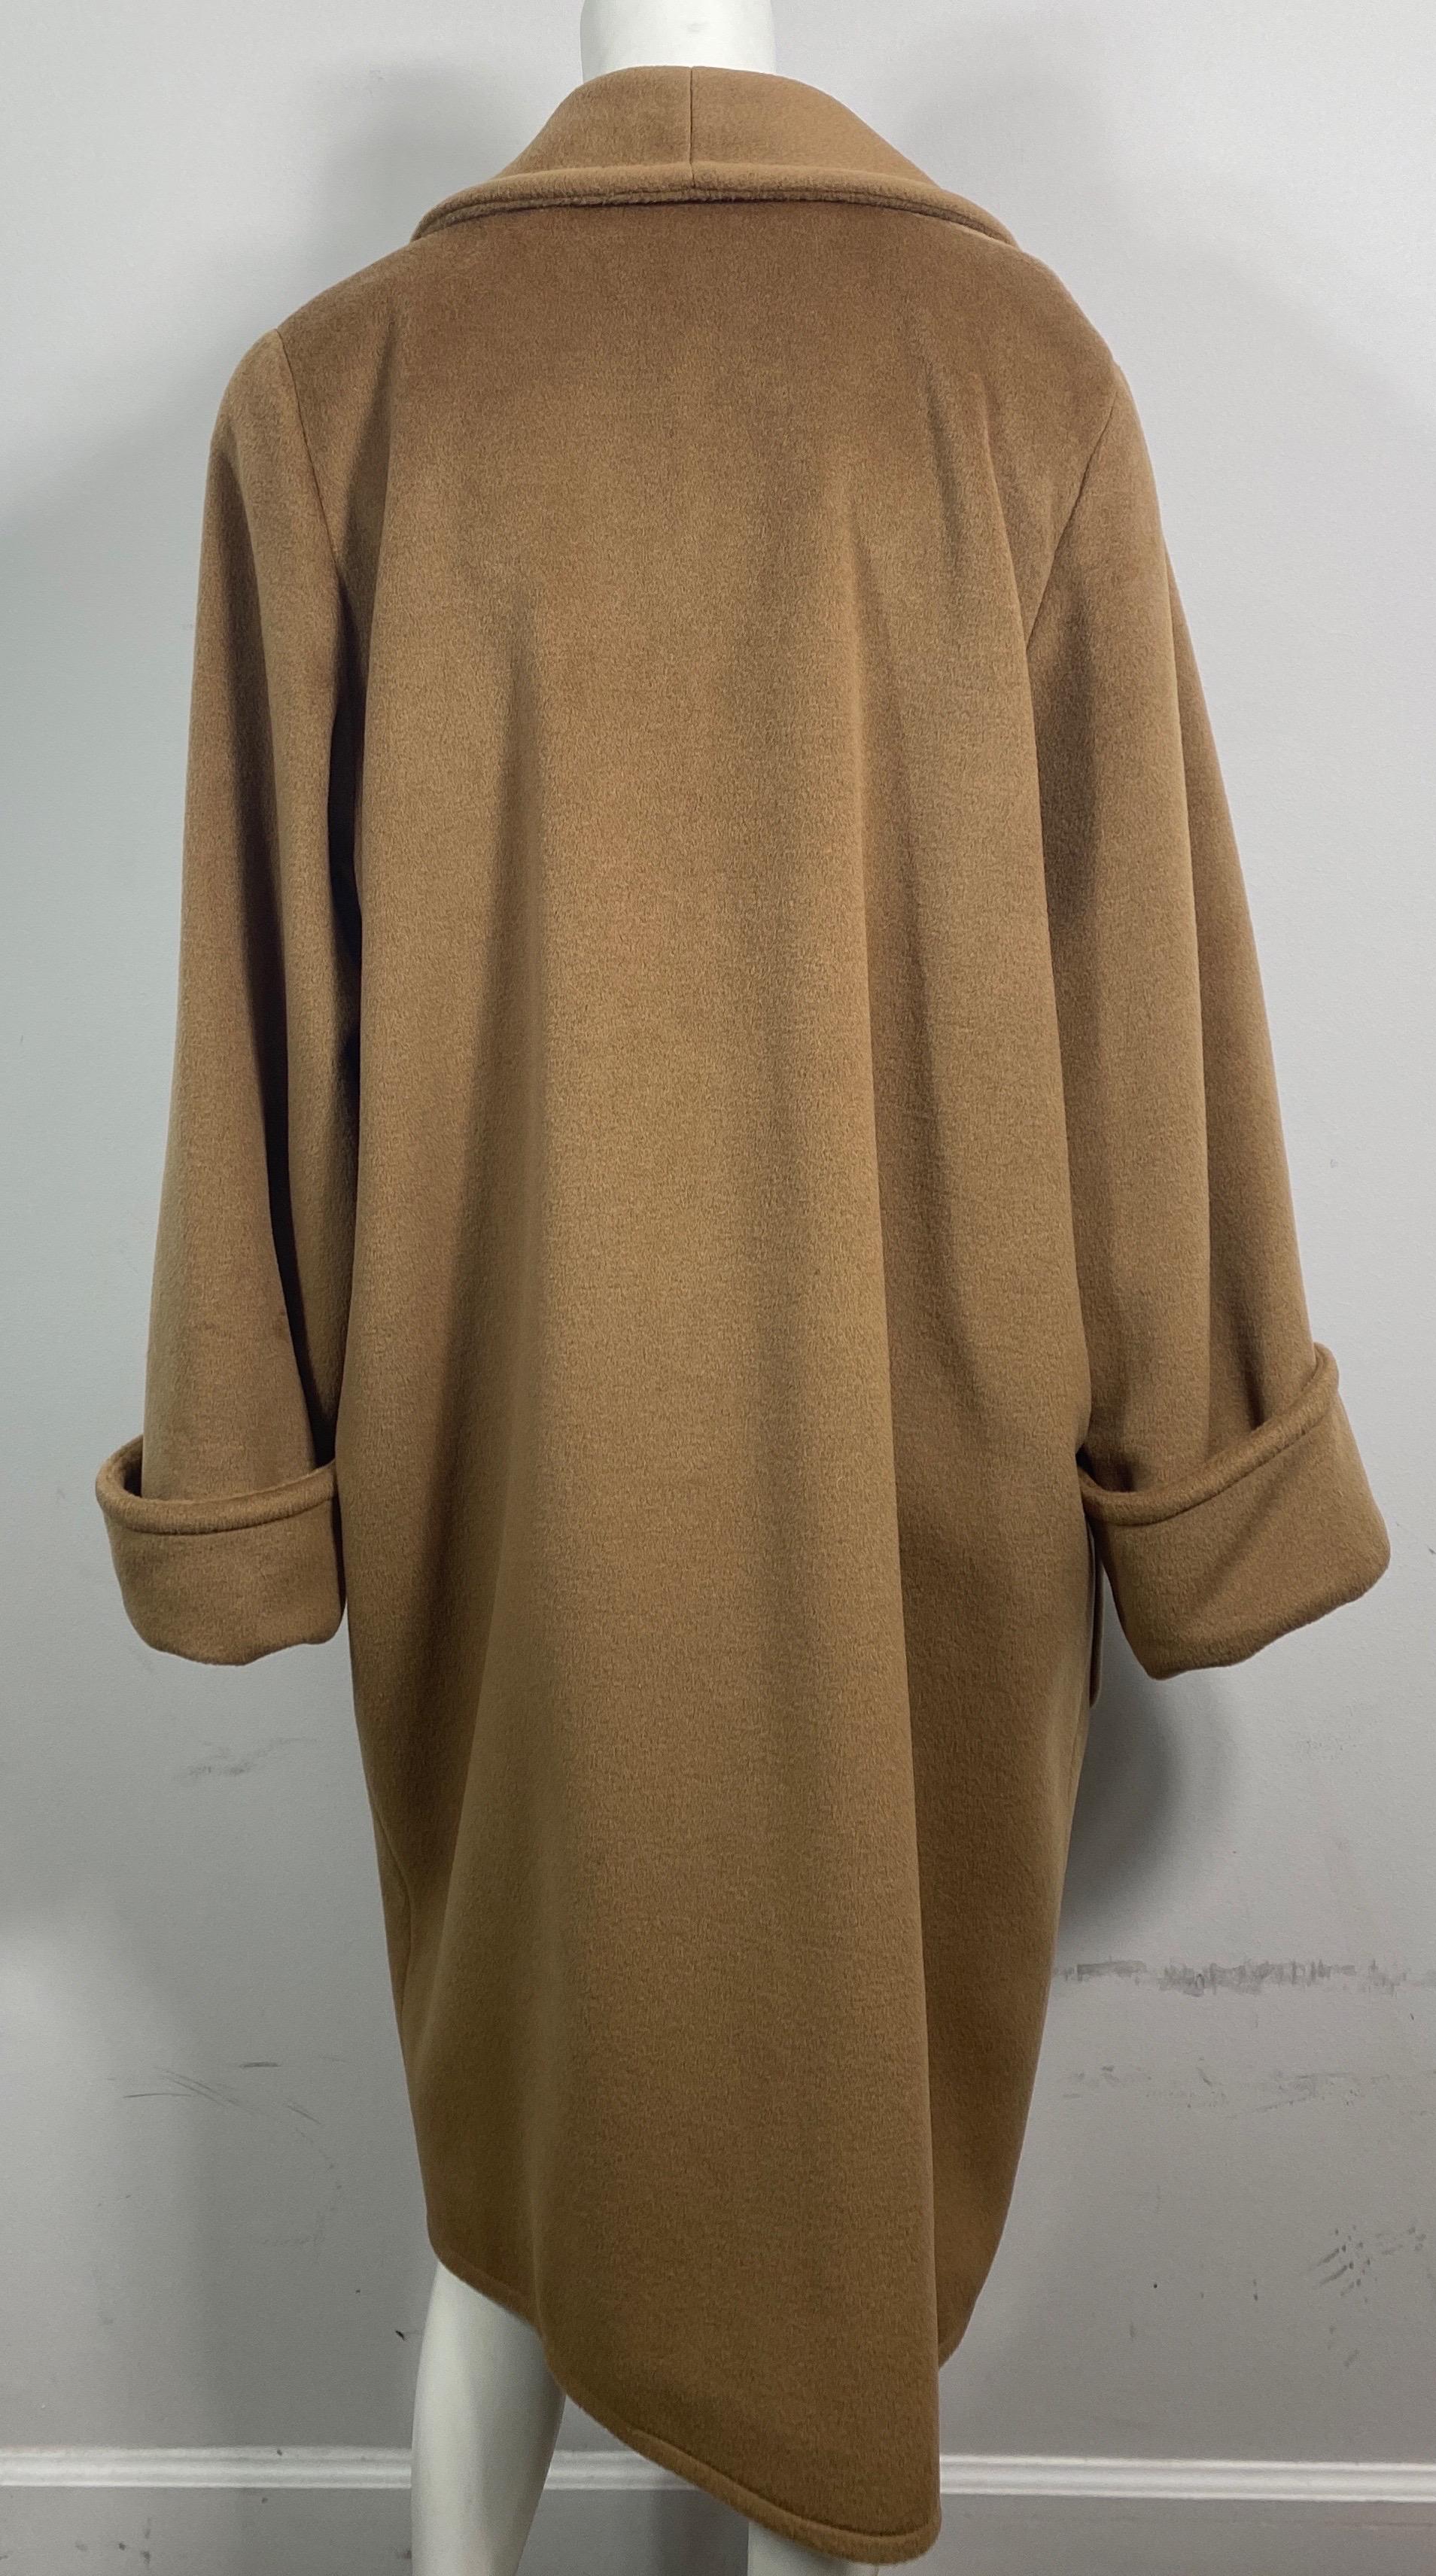 Valentino Boutique 1990’s Double Breasted Tan Cashmere Oversized Coat - Size 10 For Sale 8